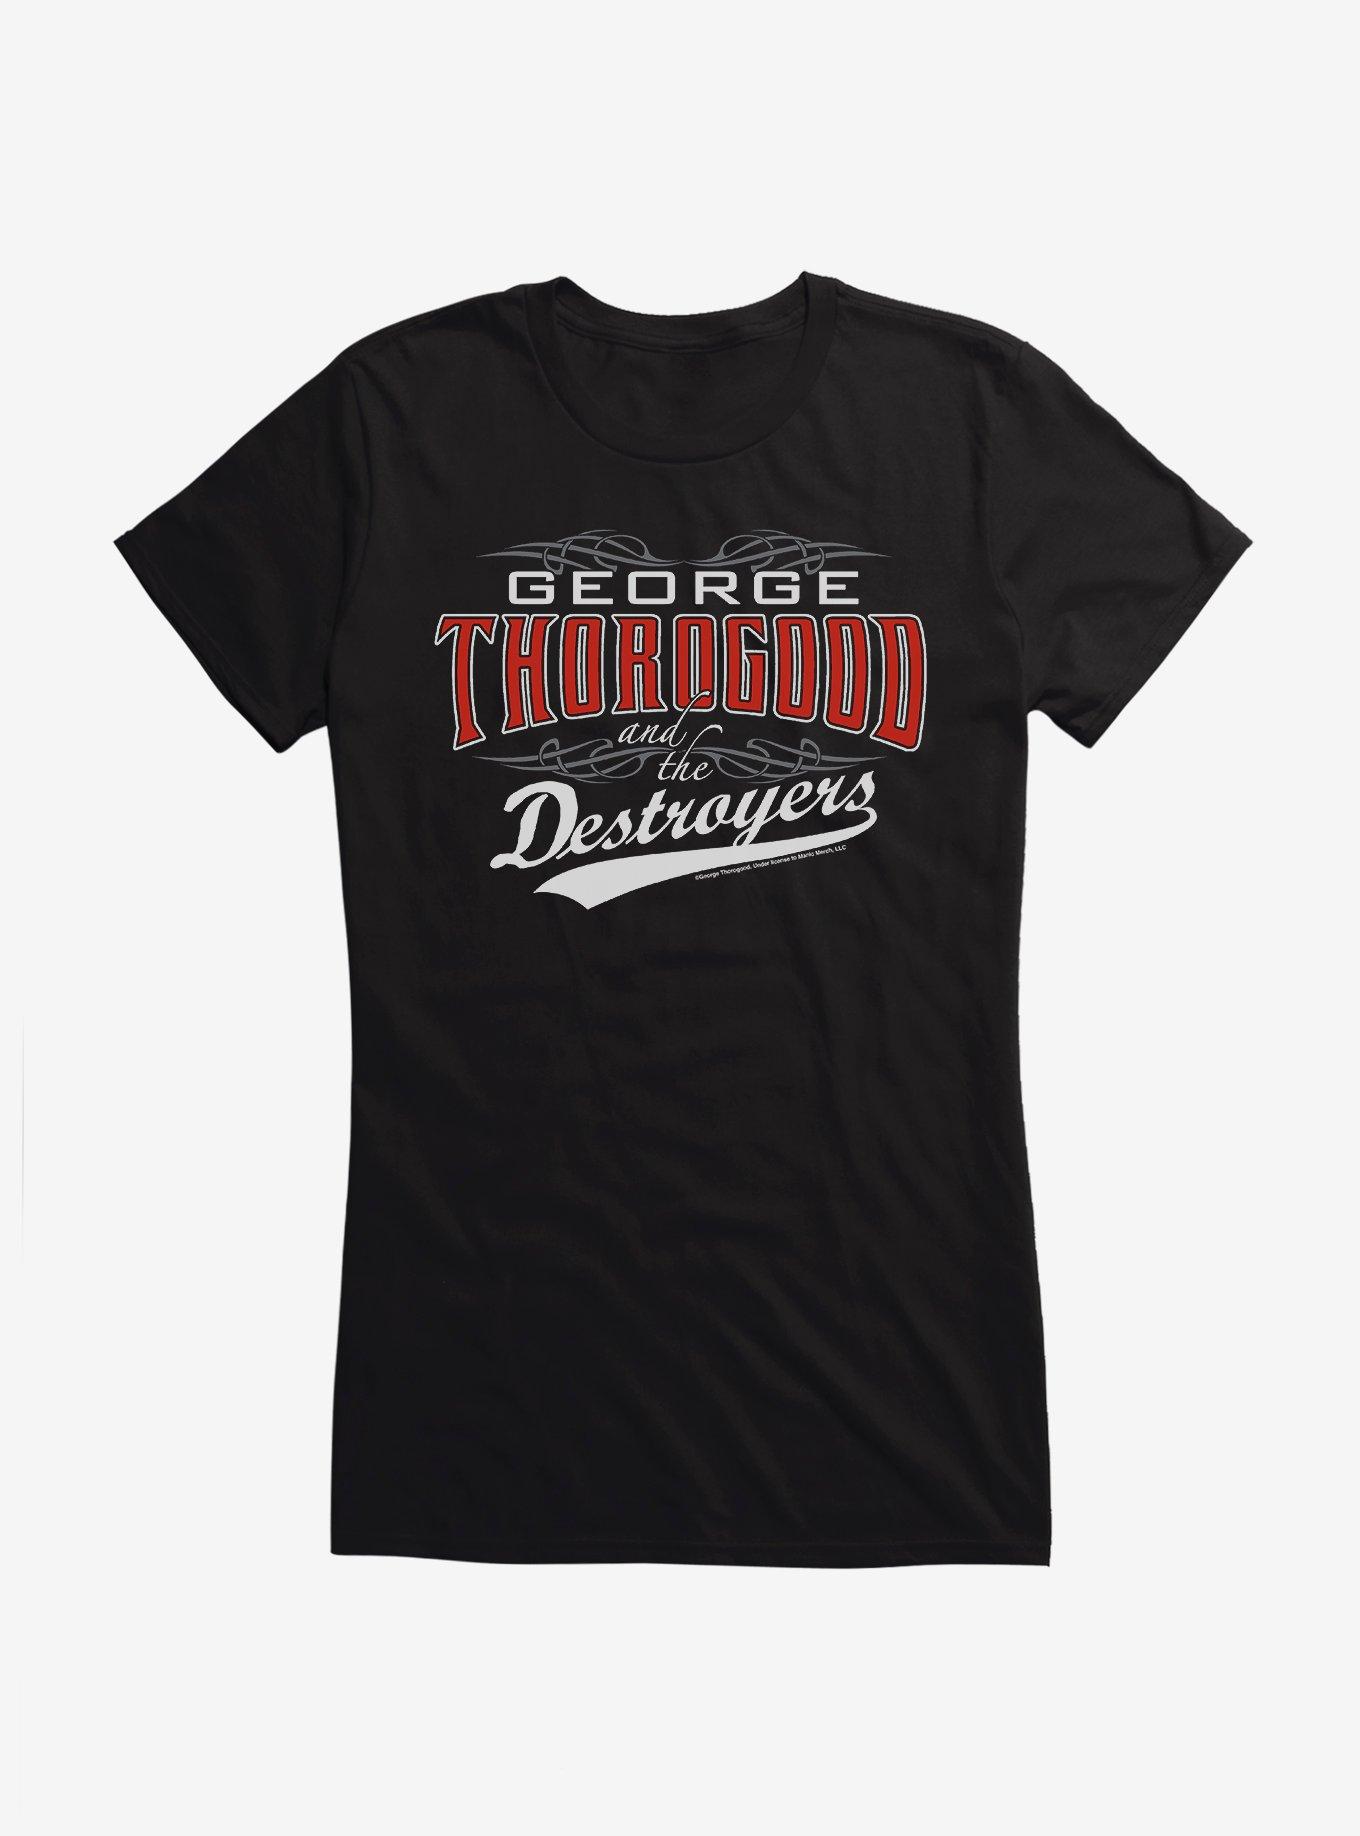 George Thorogood And The Destroyers Logo Girls T-Shirt, BLACK, hi-res